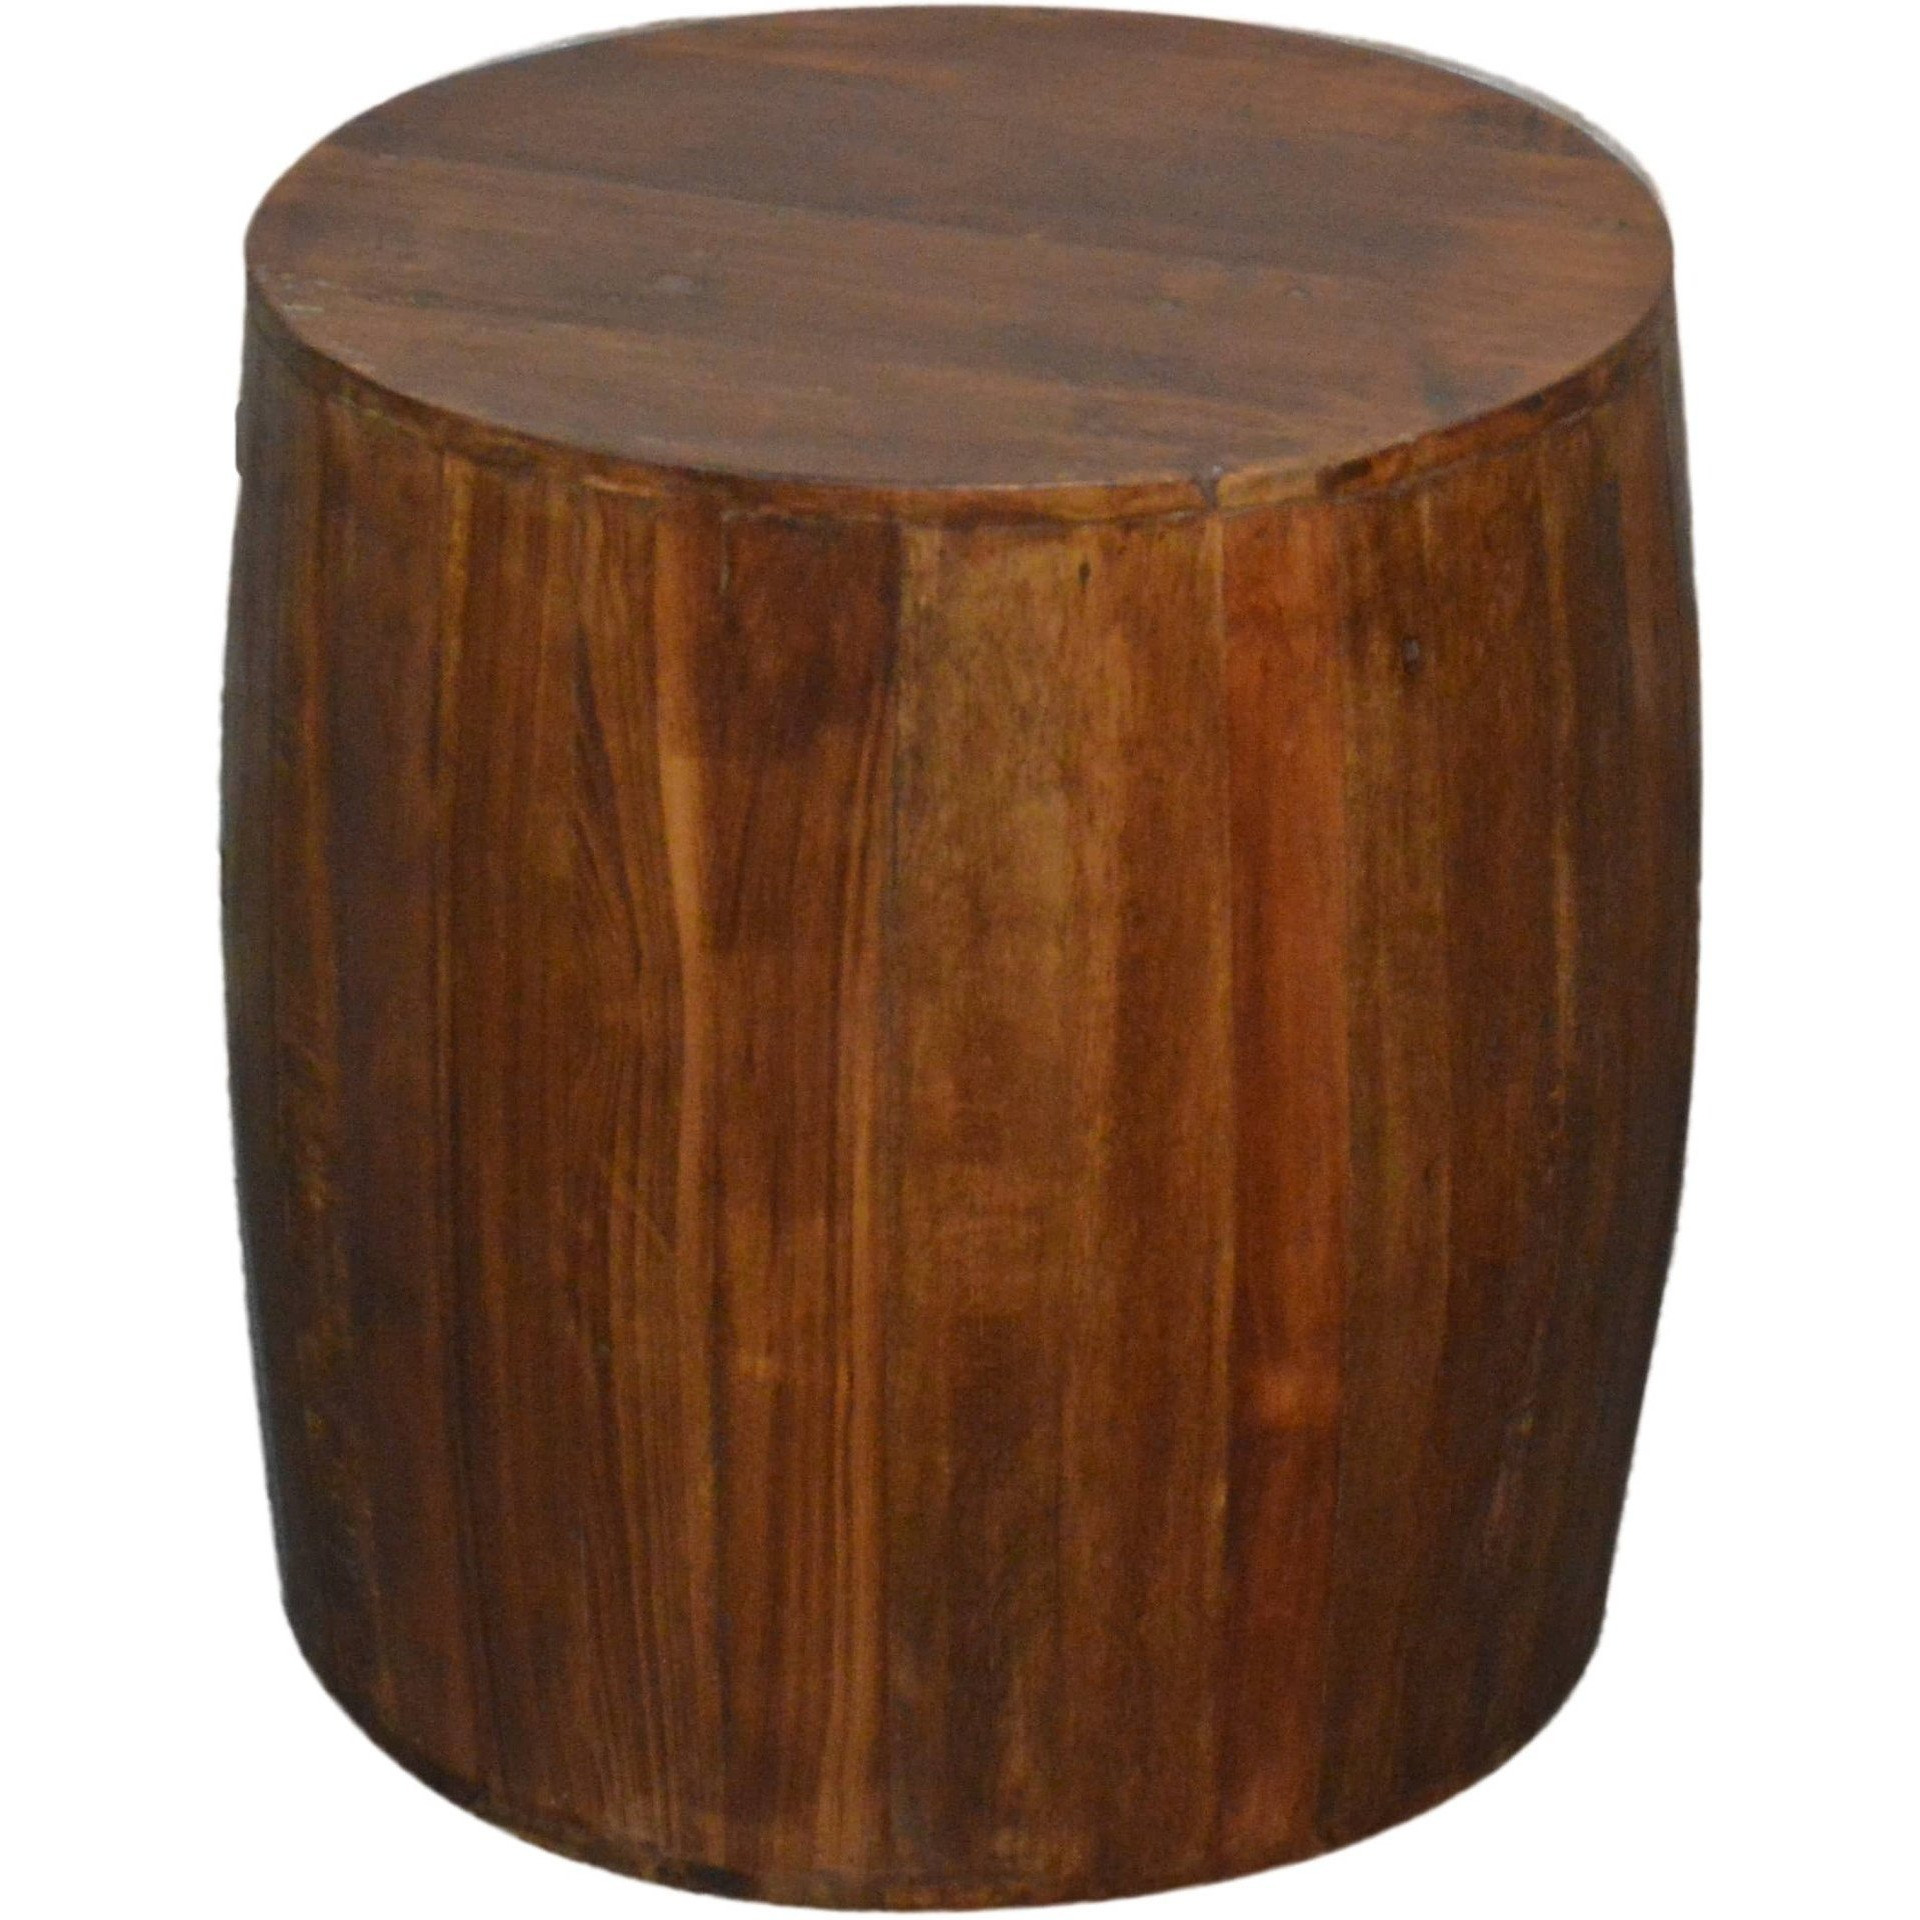 Reclaimed Wood Drum Barrel Style Side Table Stool